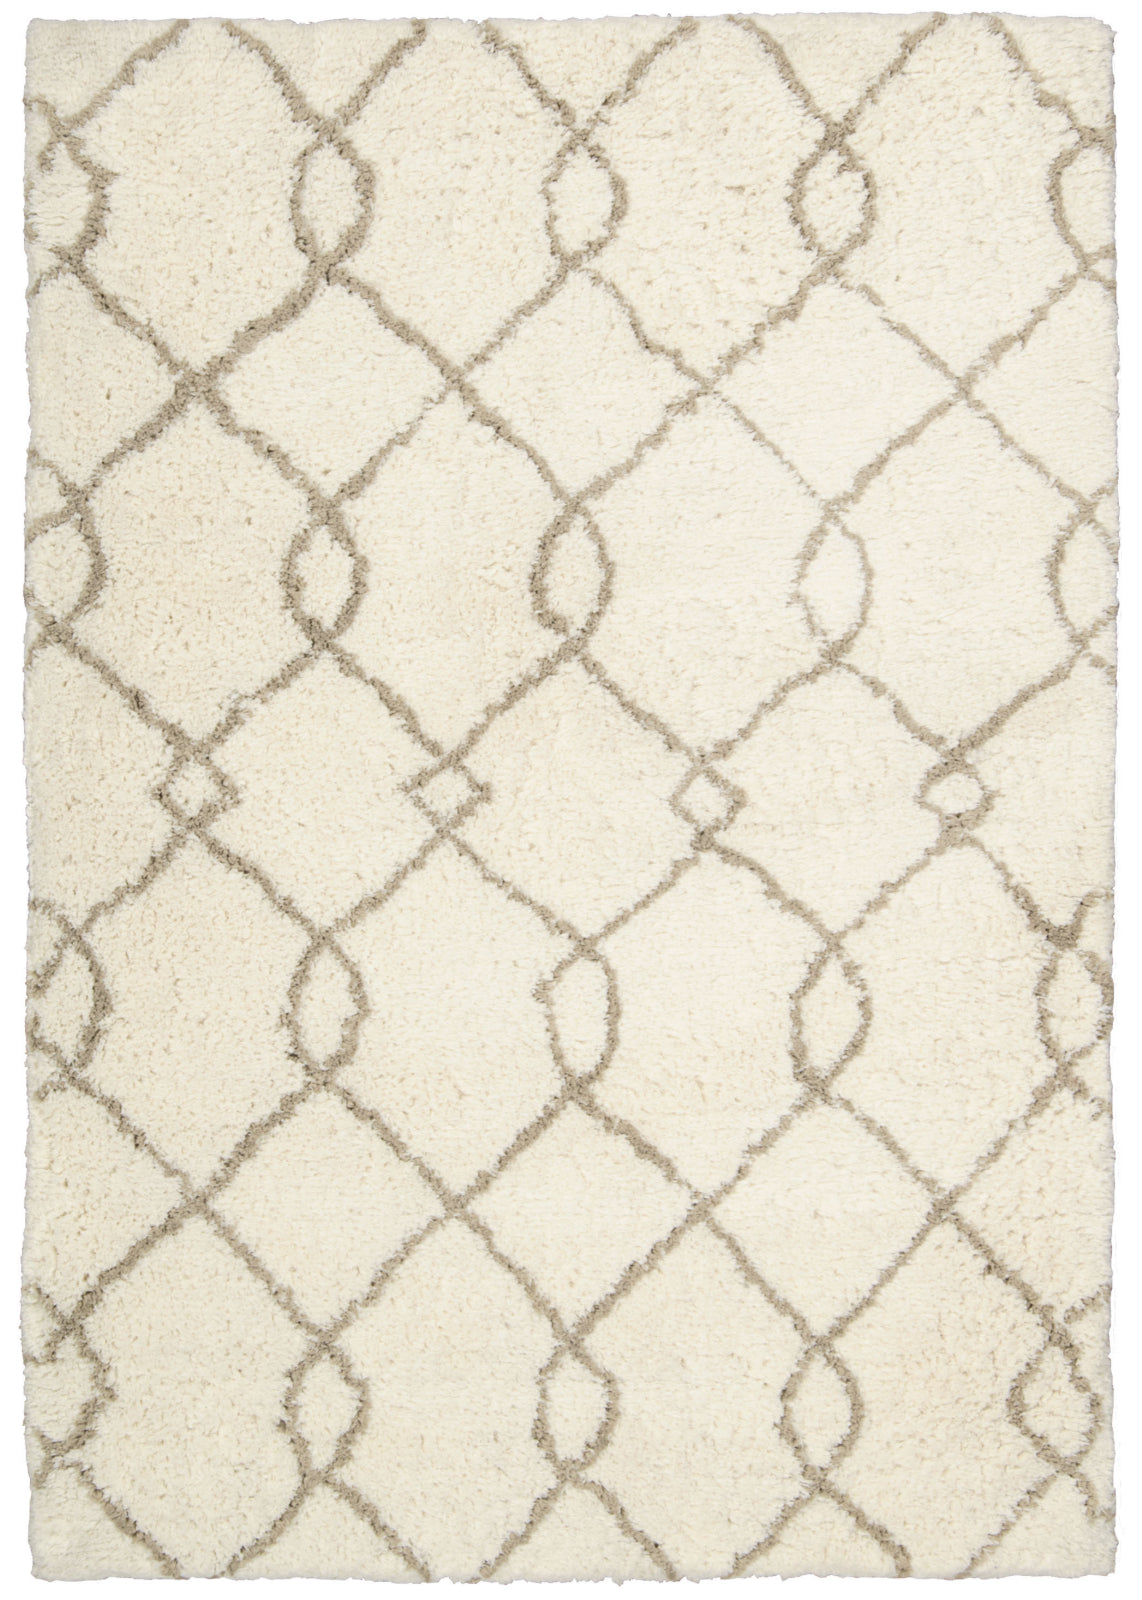 Nourison Galway GLW02 Ivory Tan Area Rug main image